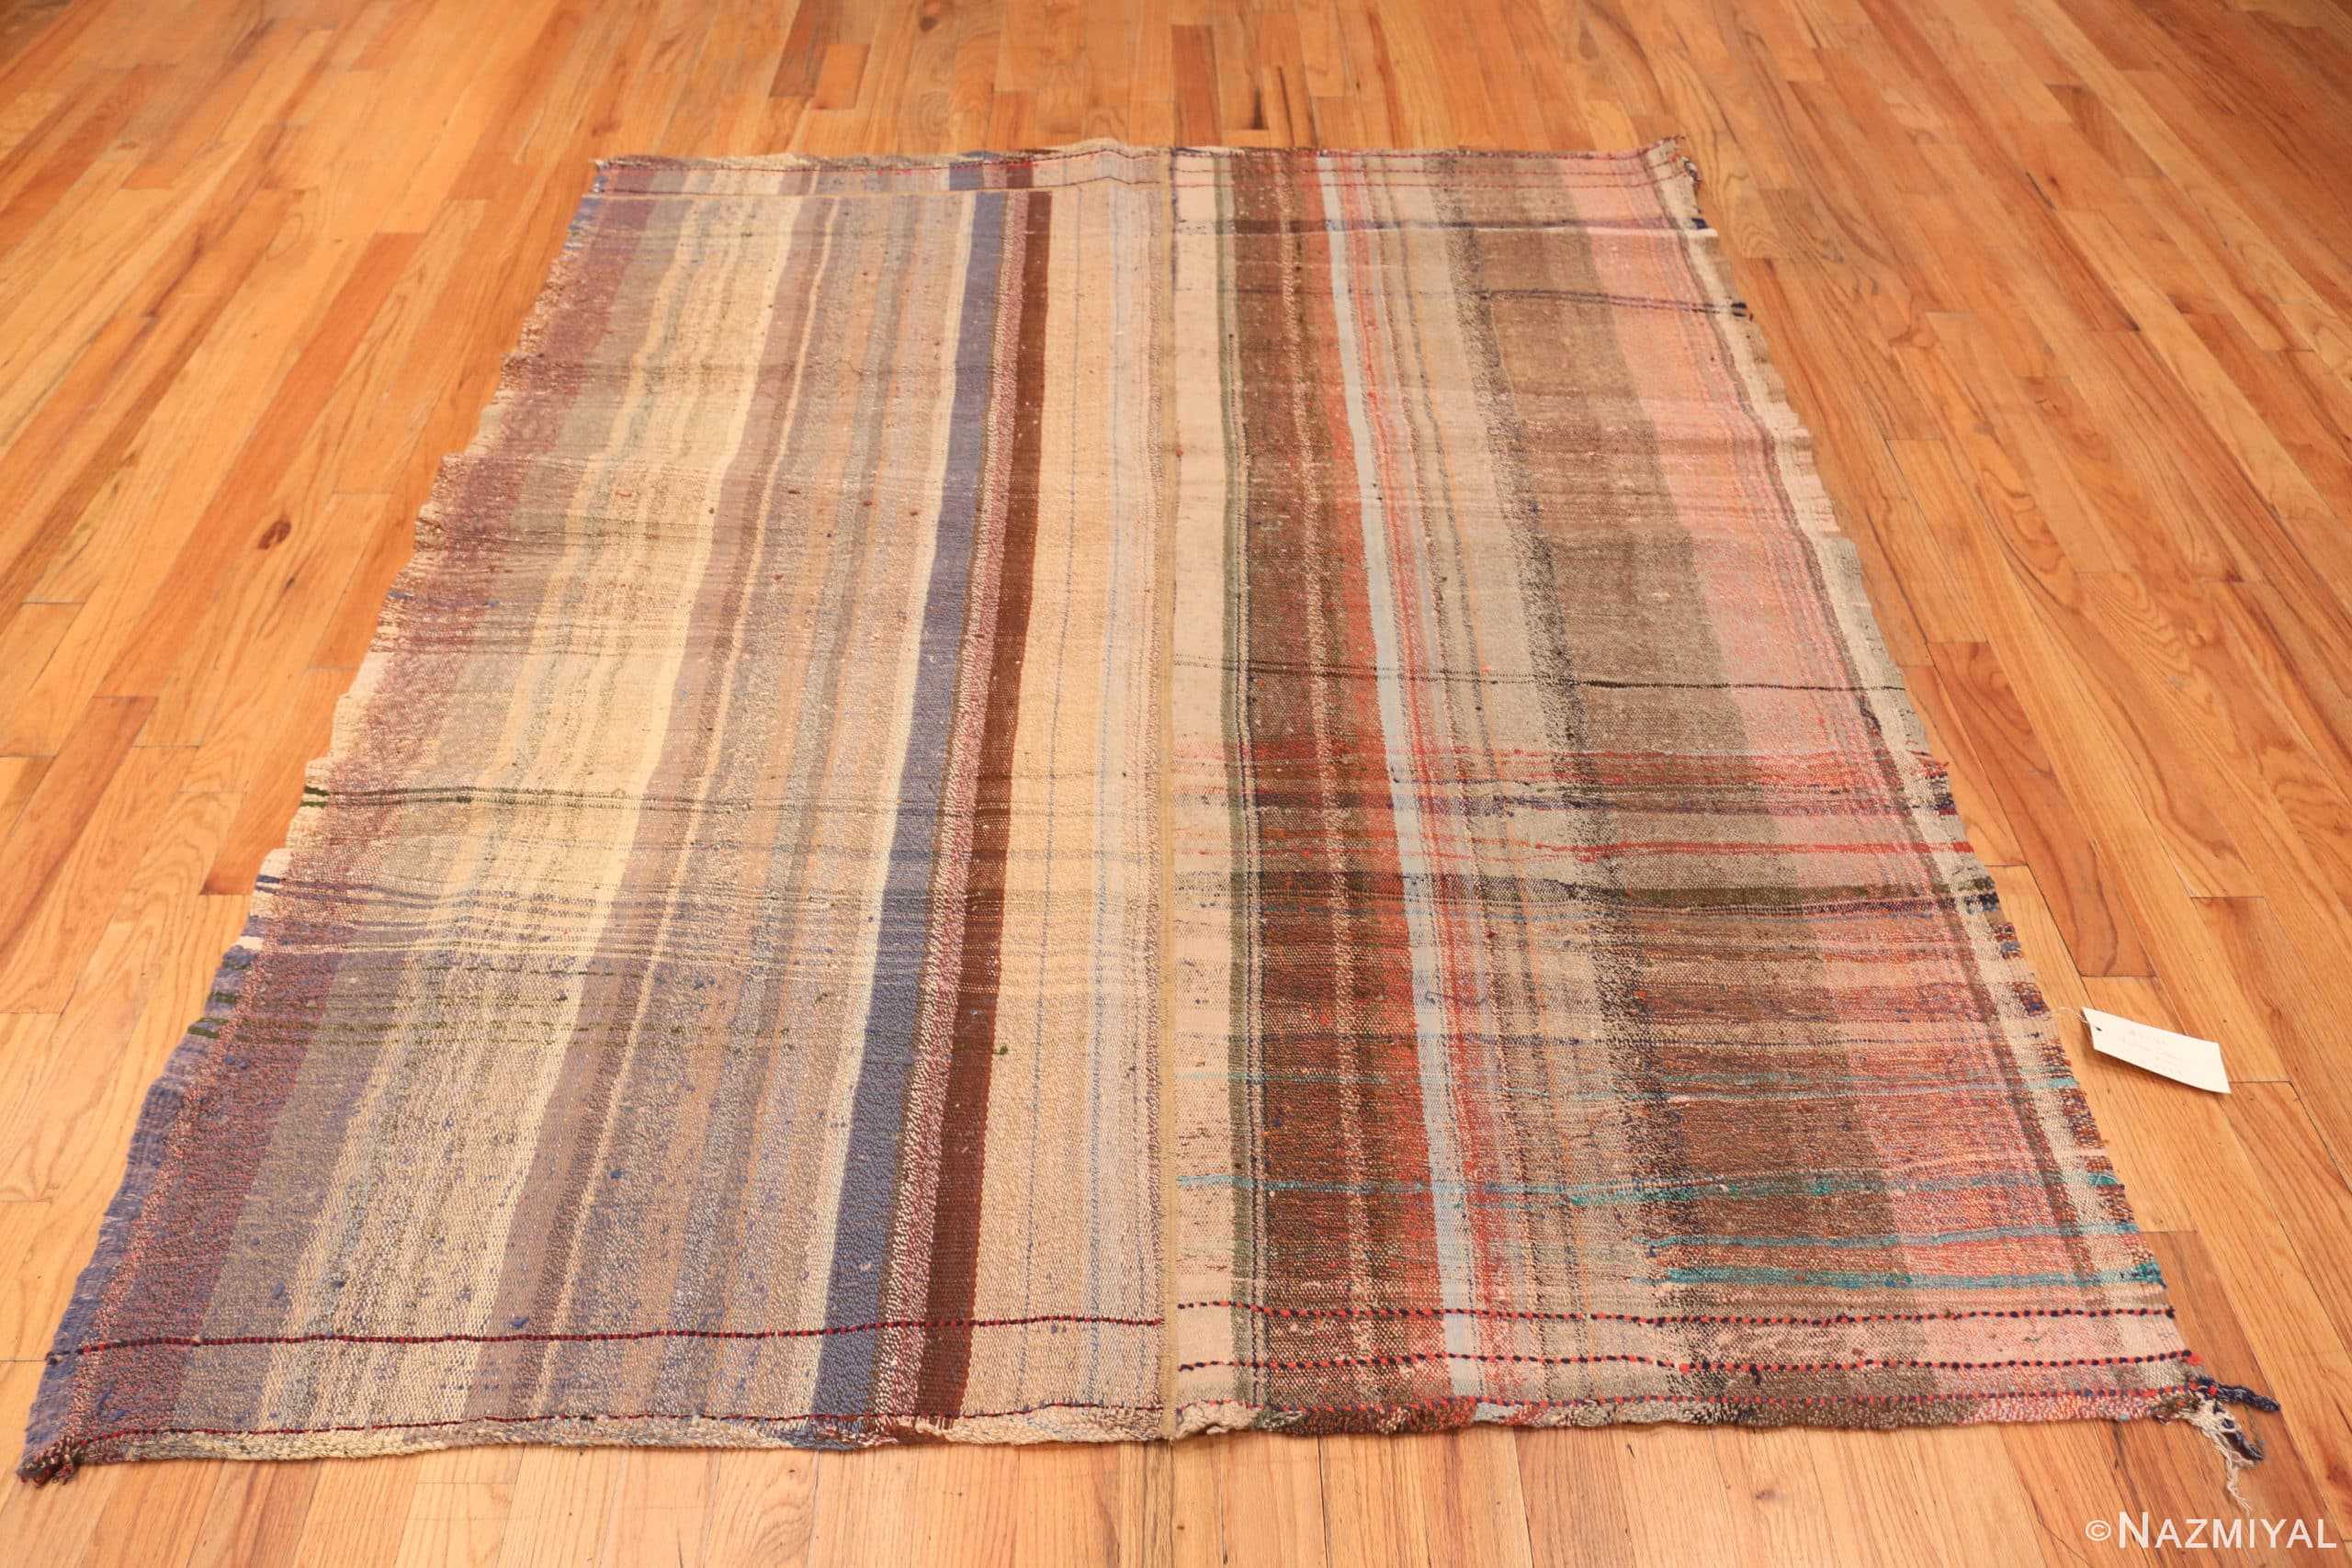 Whole View Of Small Vintage Persian Kilim Rug 60364 by Nazmiyal Antique Rugs